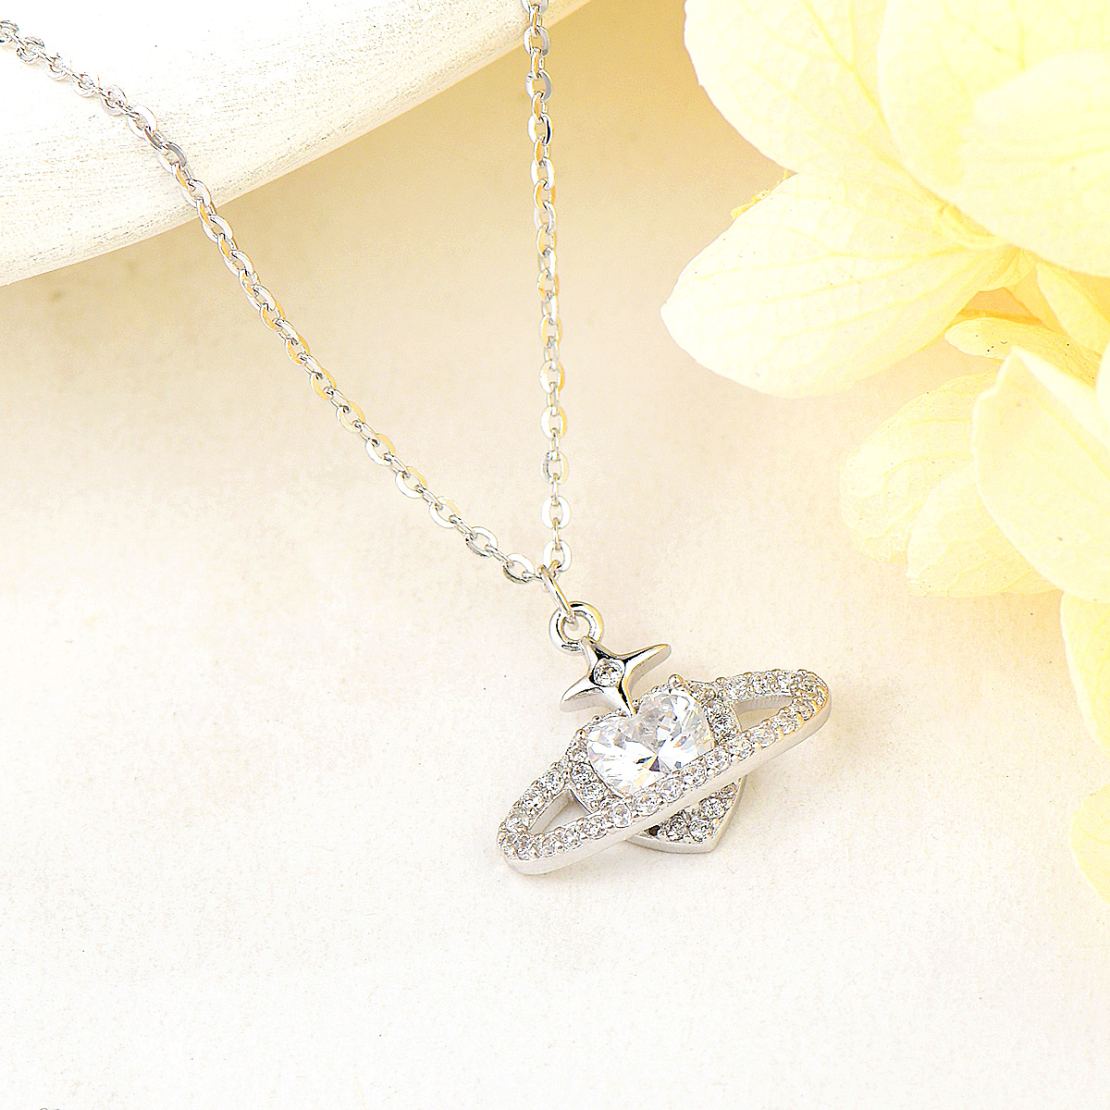 HEART SILVER NECKLACE